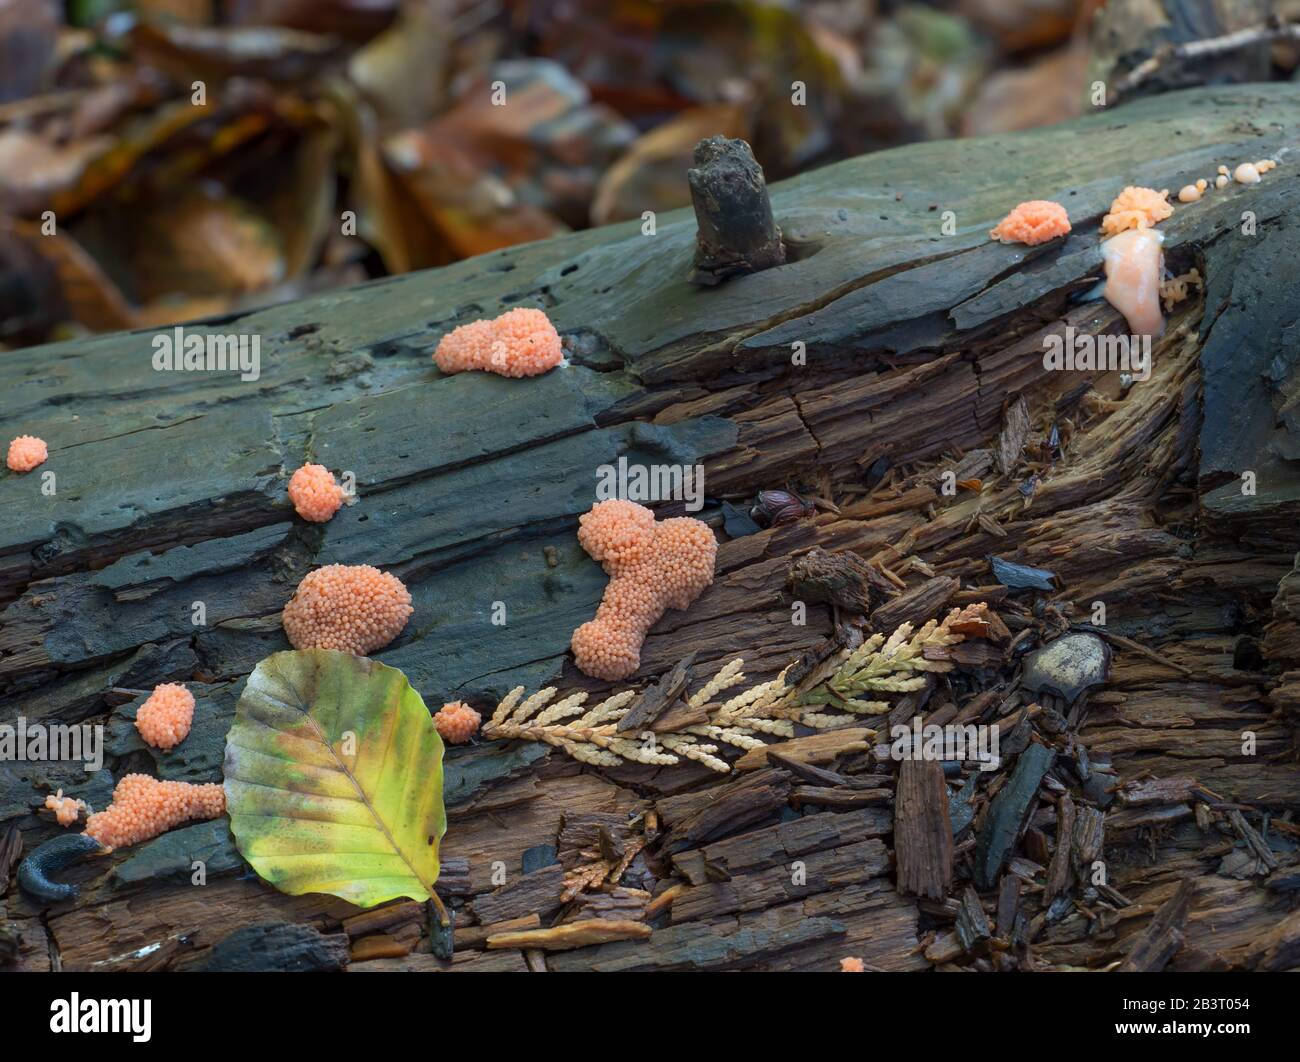 Orange Slime Mould Tuberifa Ferruginosa also known as Raspberry Slime Mould. On decaying tree in English woodland. Stock Photo